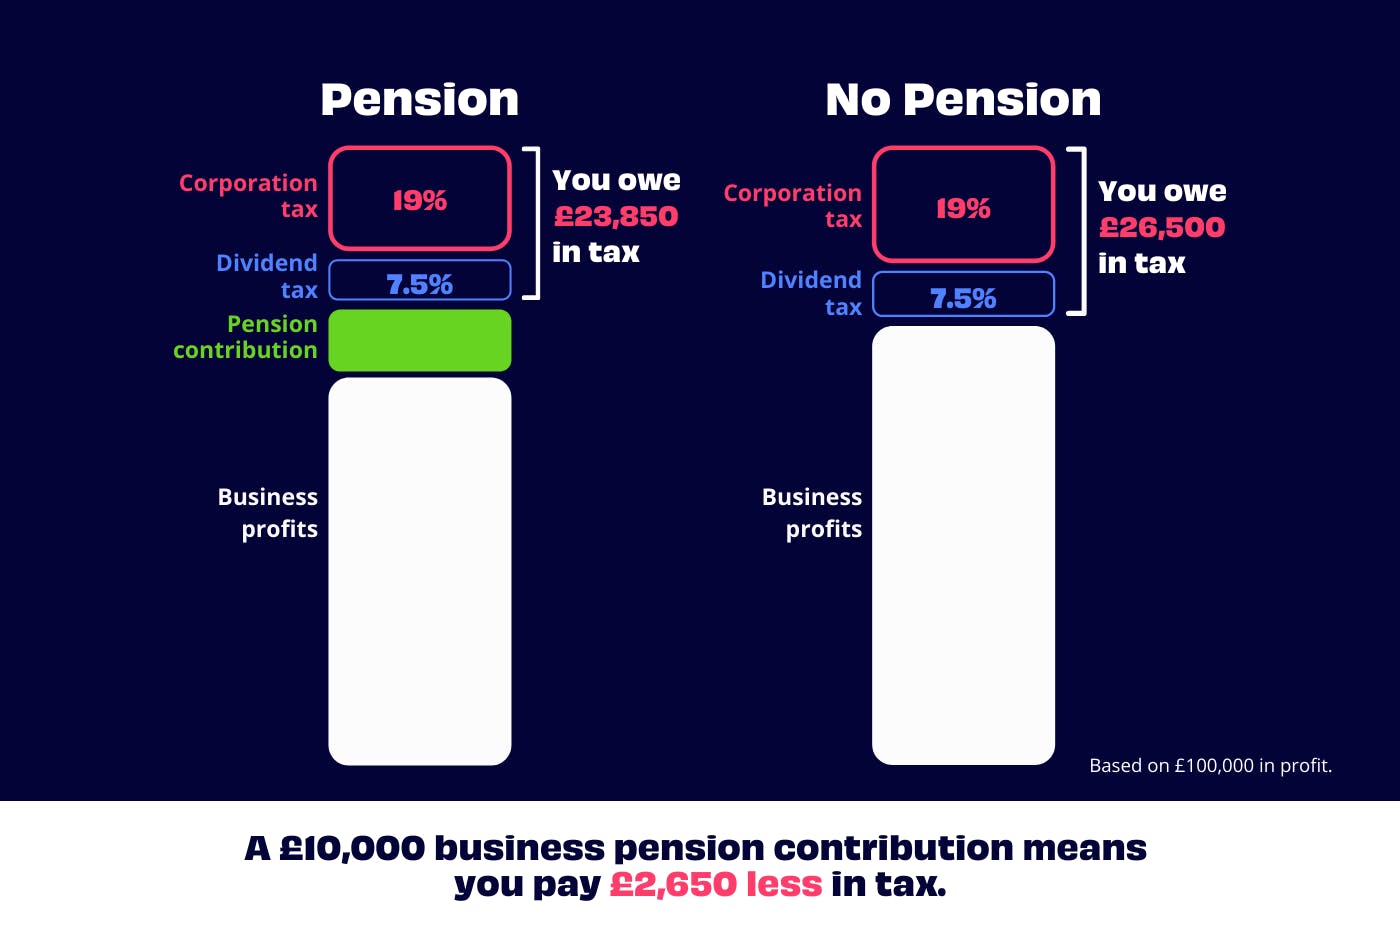 self-employed-pension-tax-relief-explained-penfold-pension